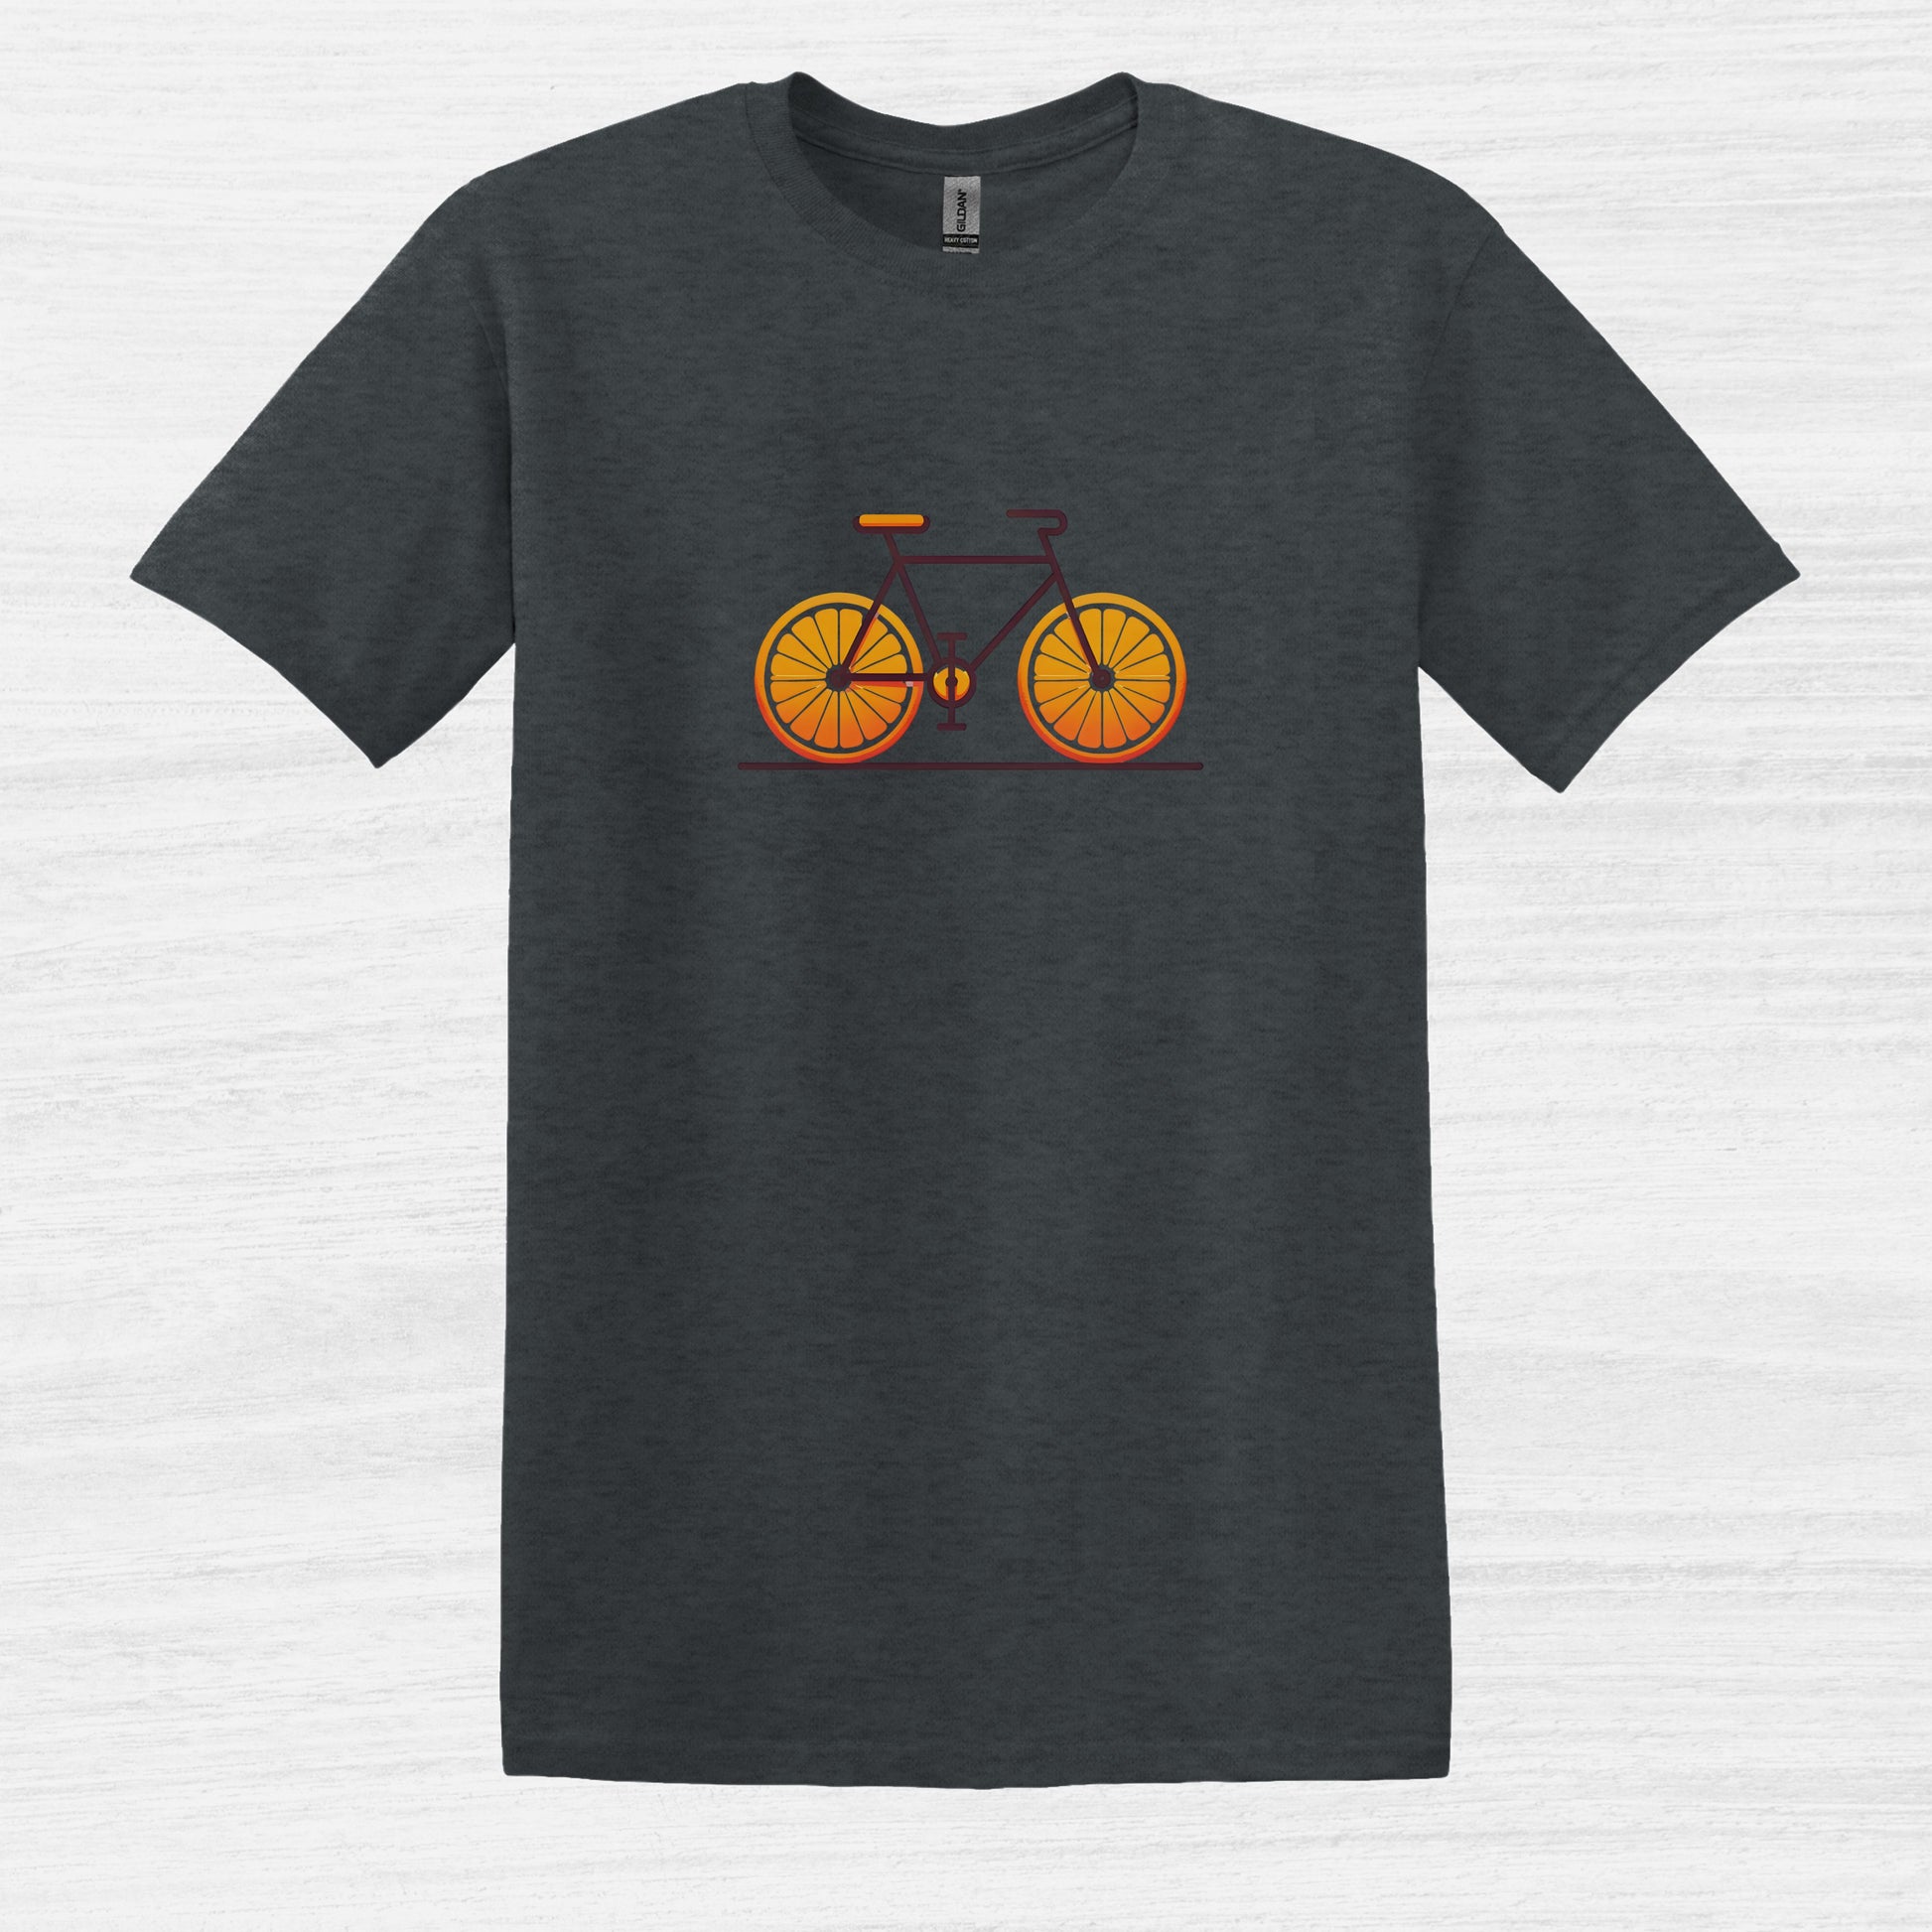 Bicycle with orange slices wheels Graphic T-Shirt for Men Dark Heather 1